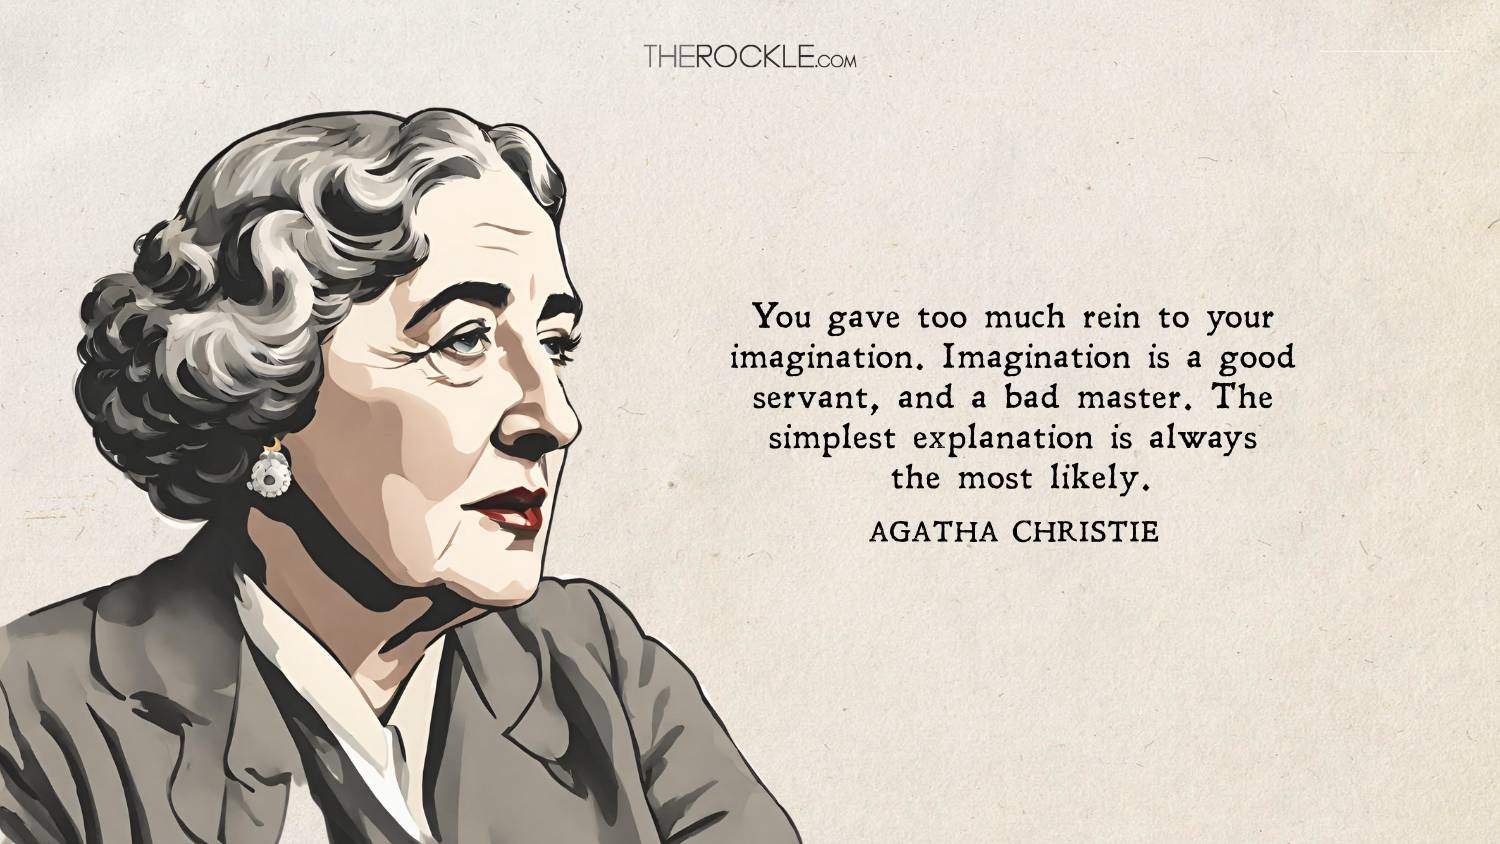 Agatha Christie illustration and quote